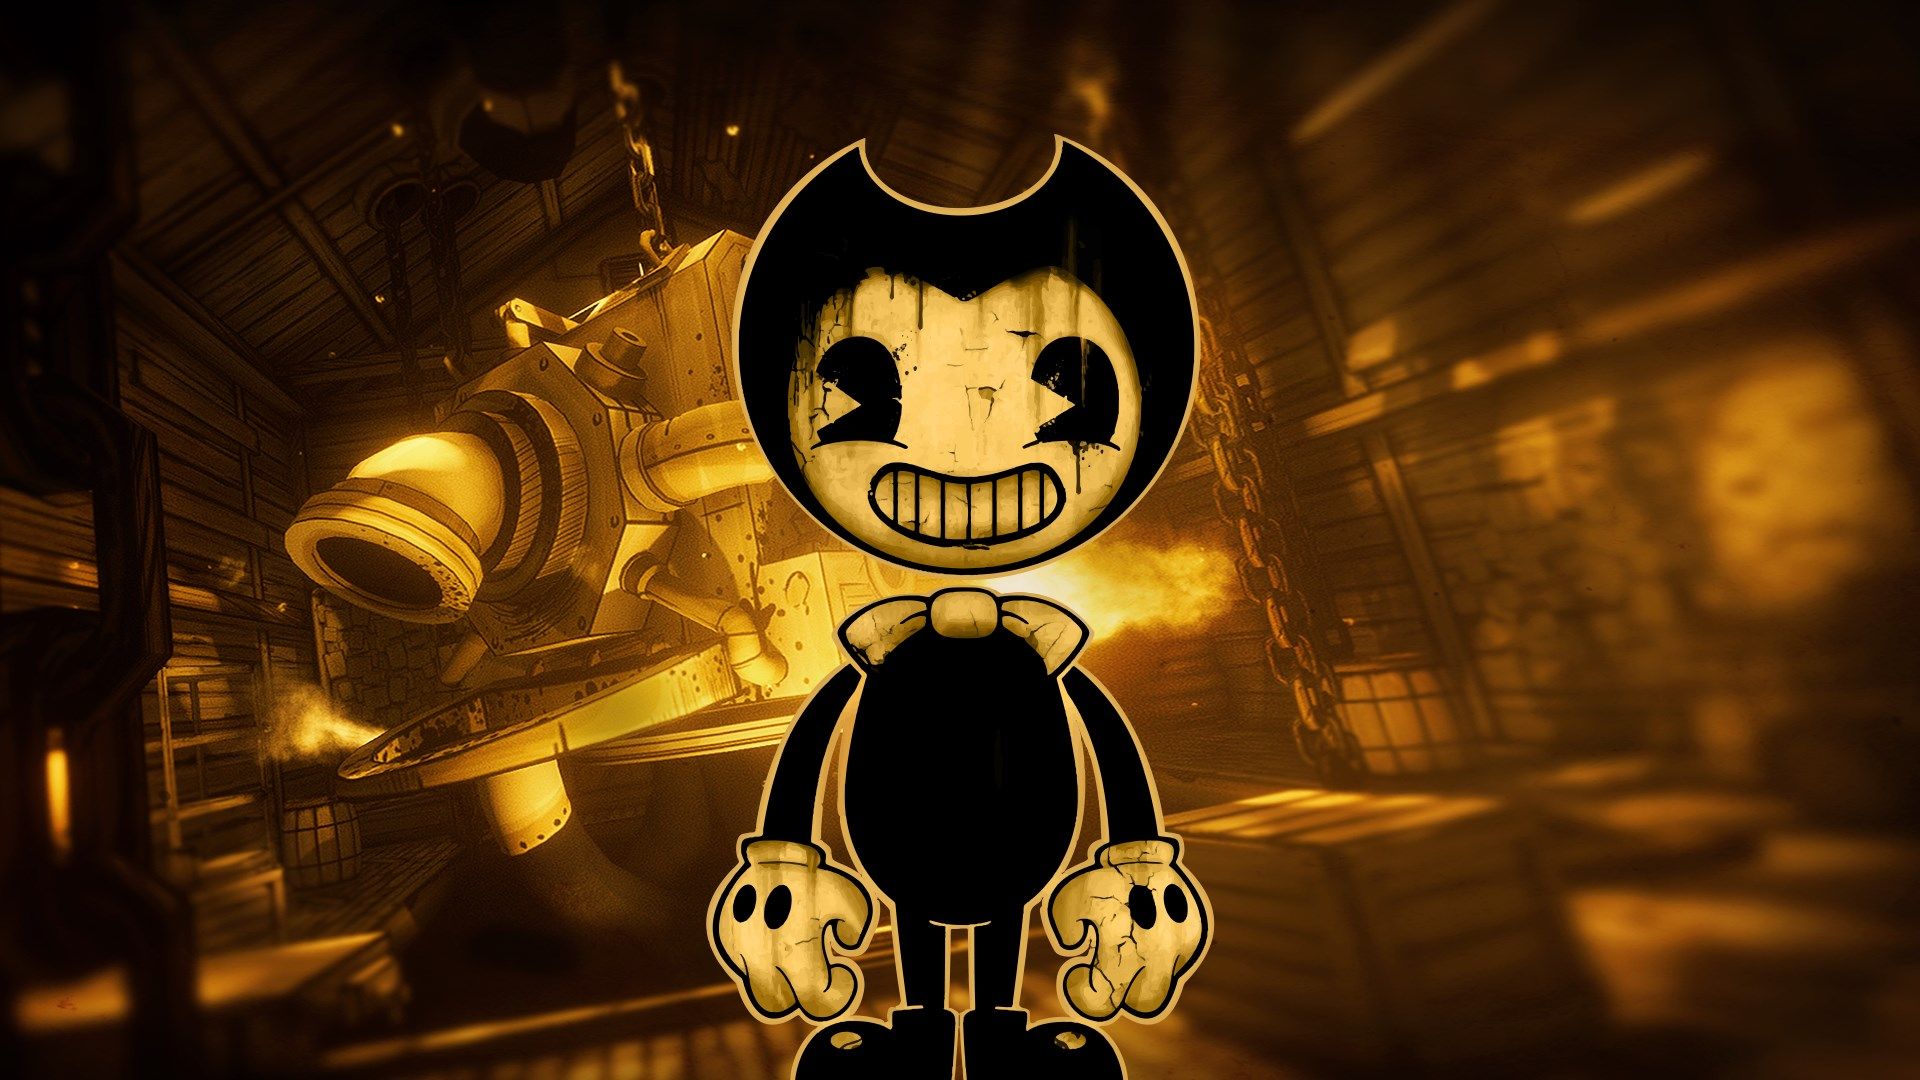 LEGO Bendy And The Ink Machine Wallpaper